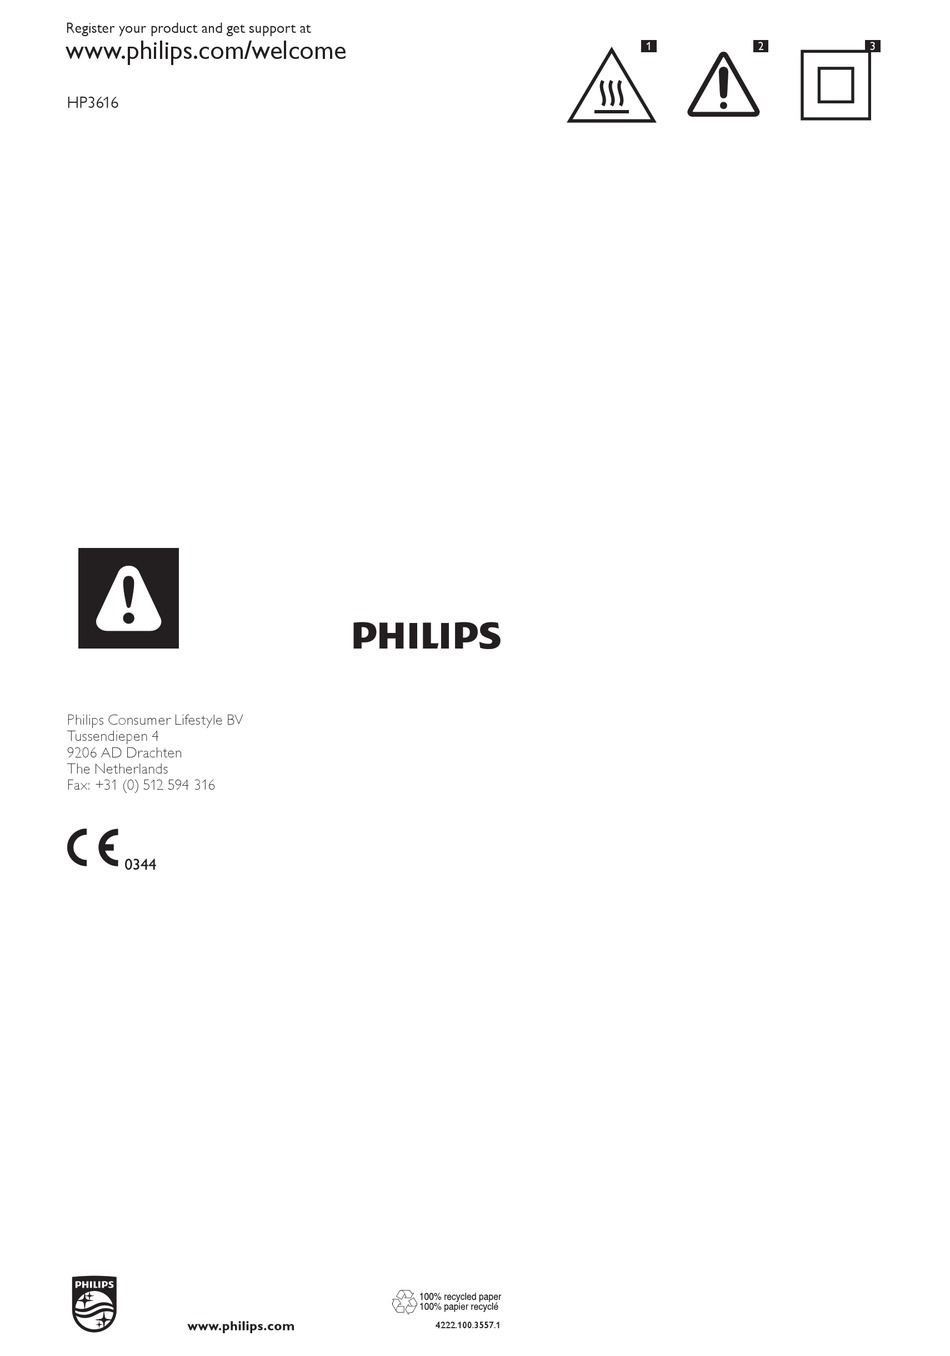 Ampere Usually Applicable PHILIPS HP3616 INSTRUCTION MANUAL Pdf Download | ManualsLib